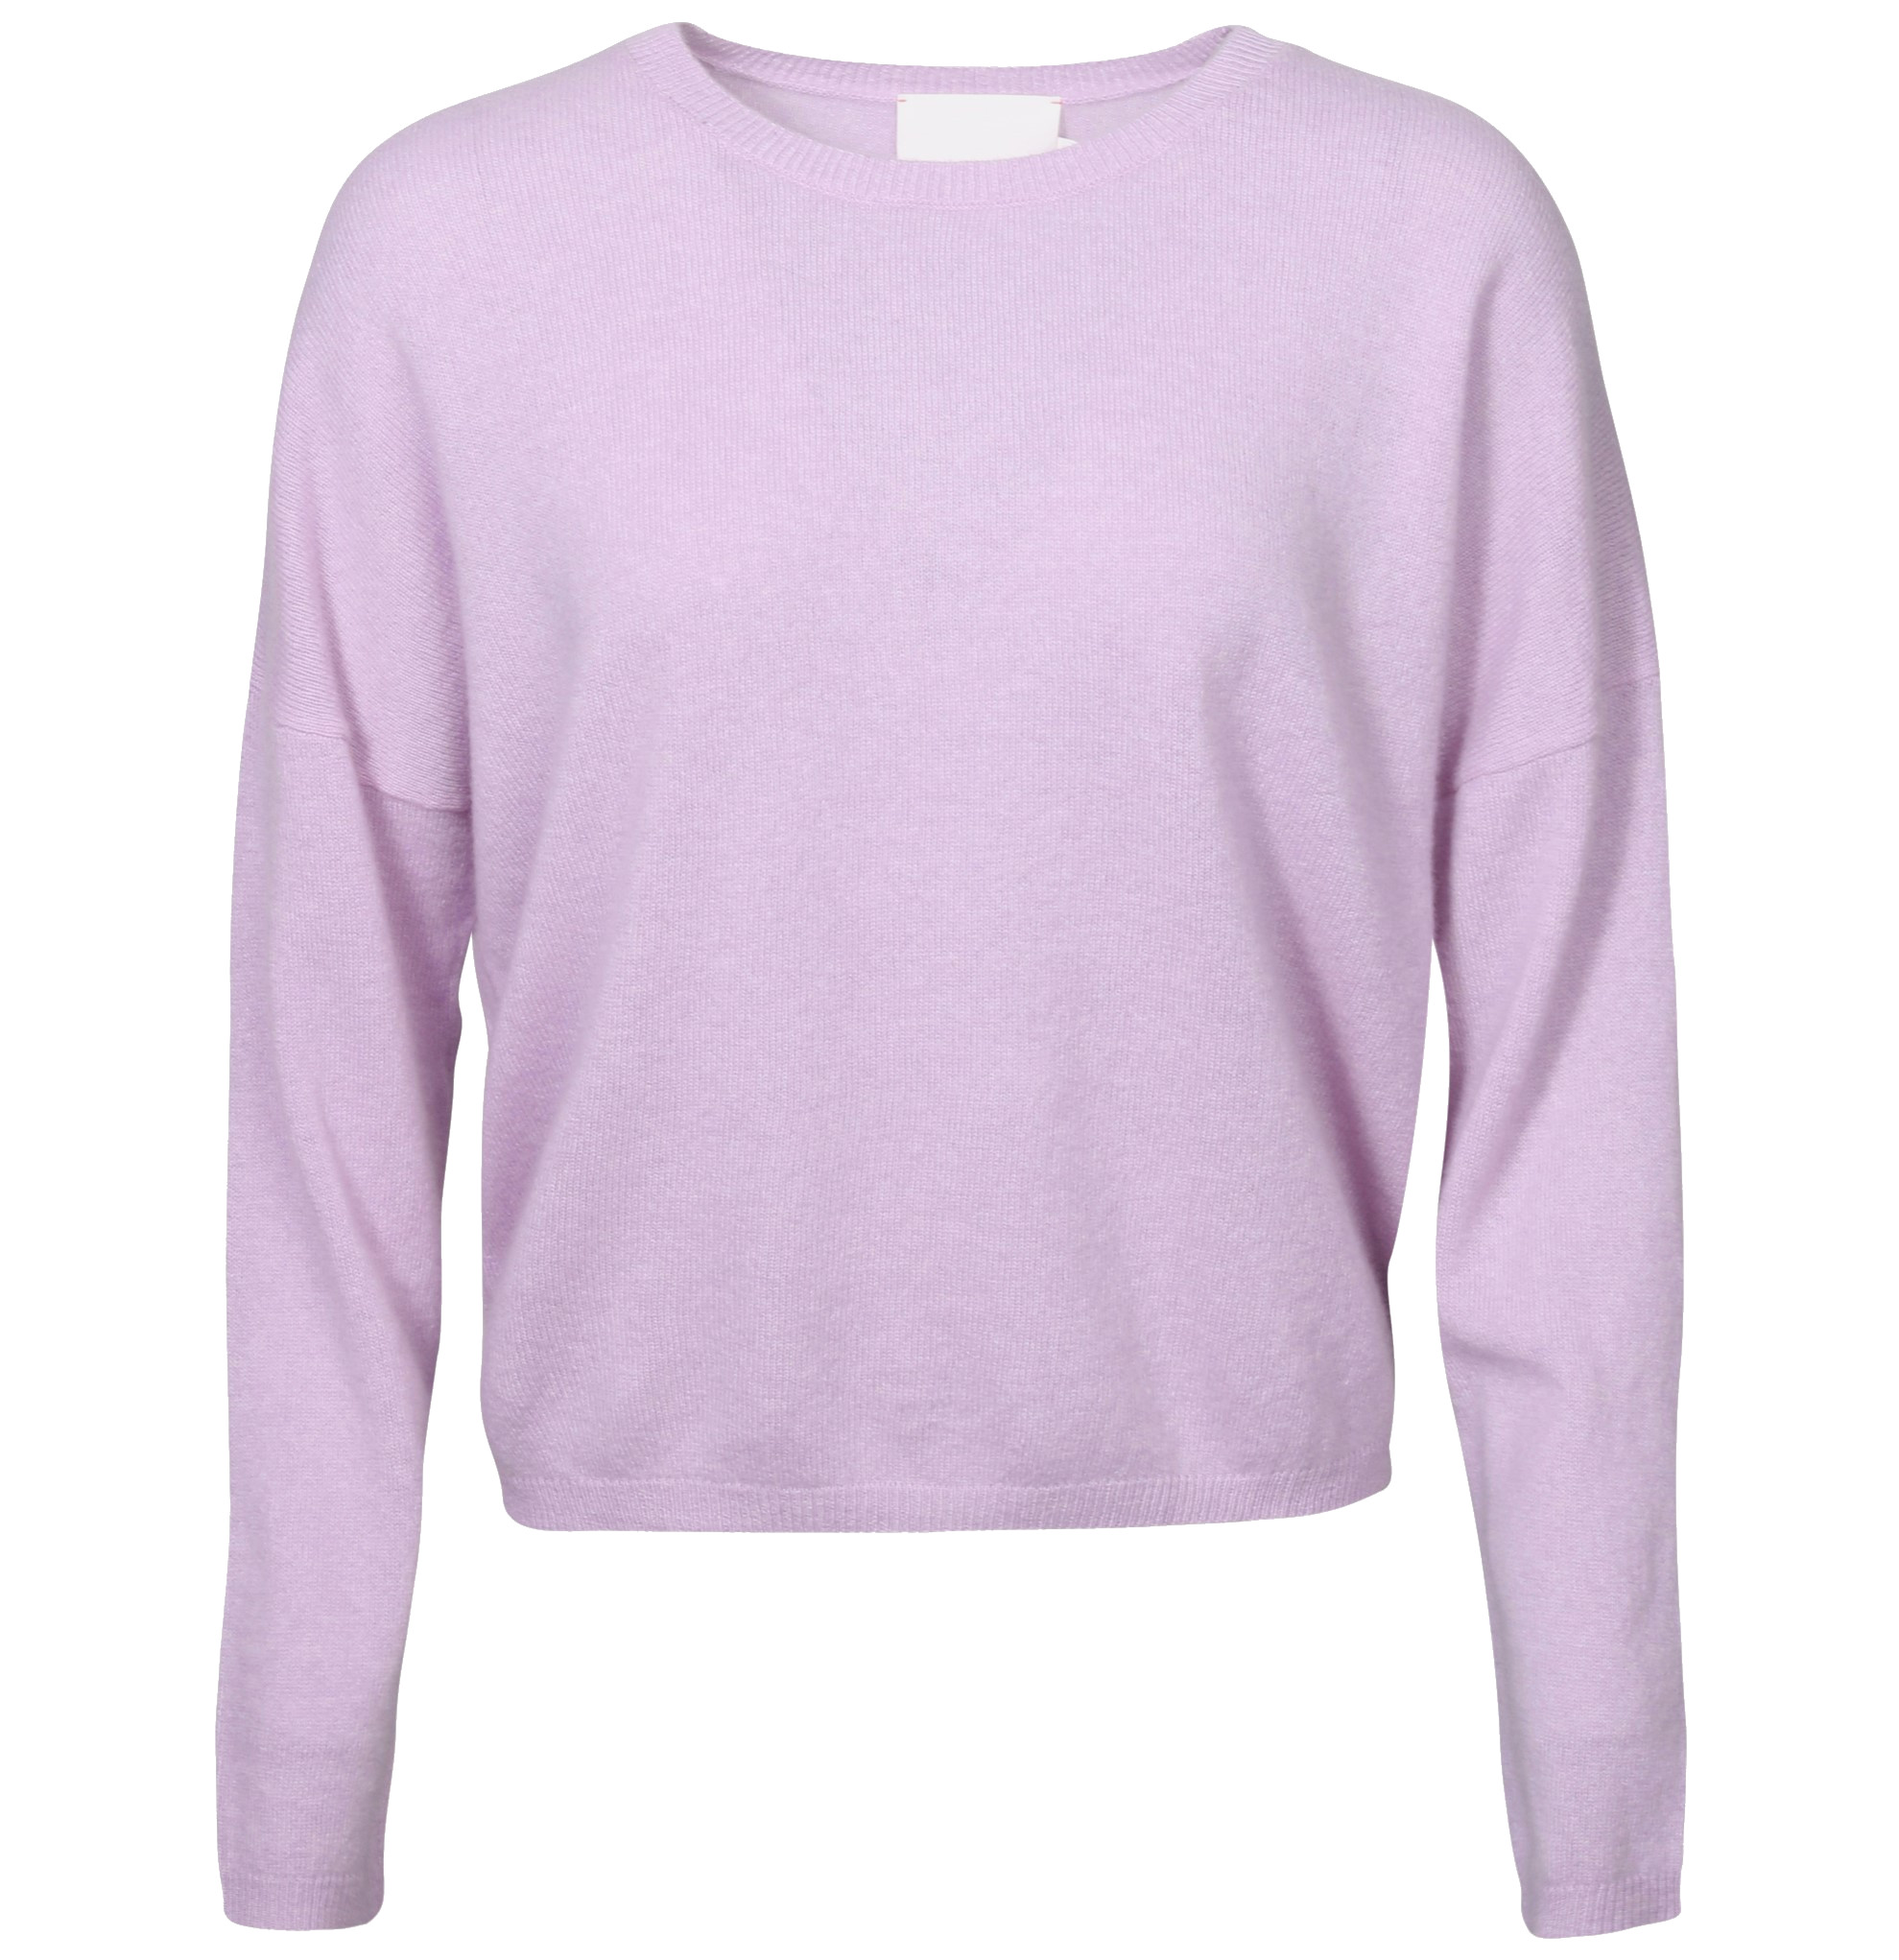 ABSOLUT CASHMERE Round Neck Sweater Kaira in Light Lilac